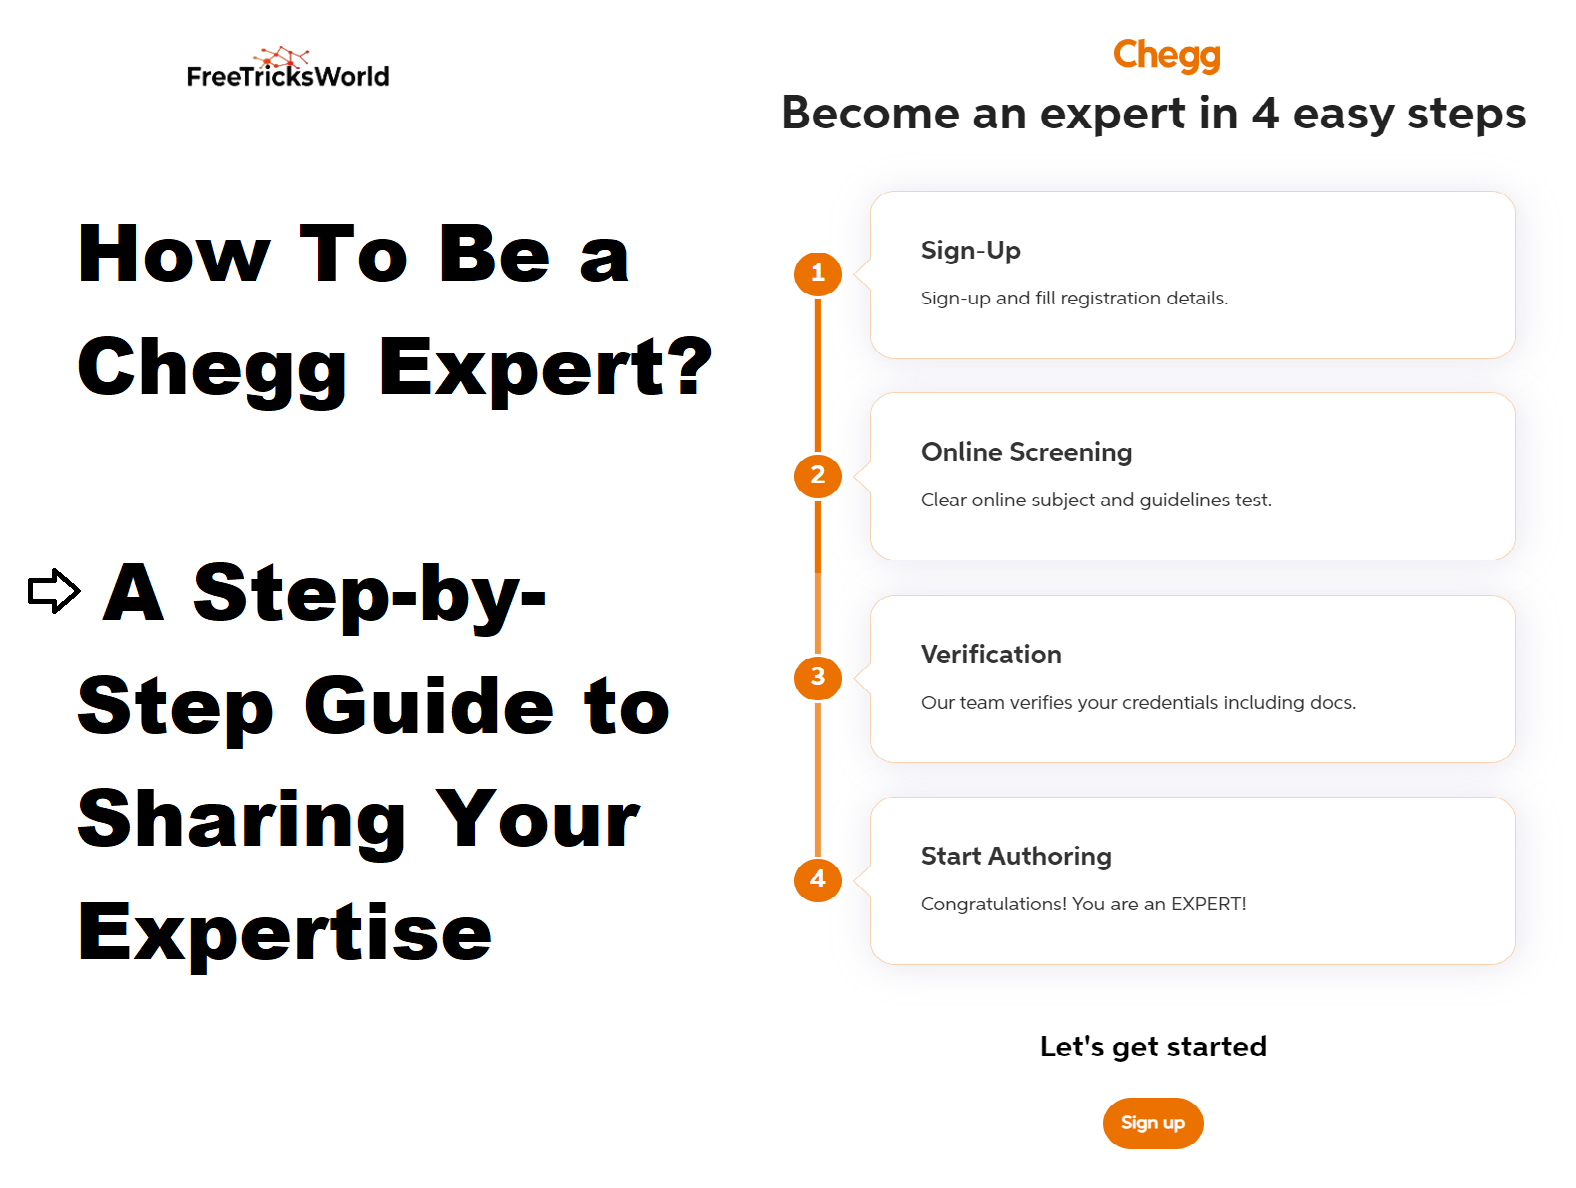 How To Be a Chegg Expert: A Step-by-Step Guide to Sharing Your Expertise